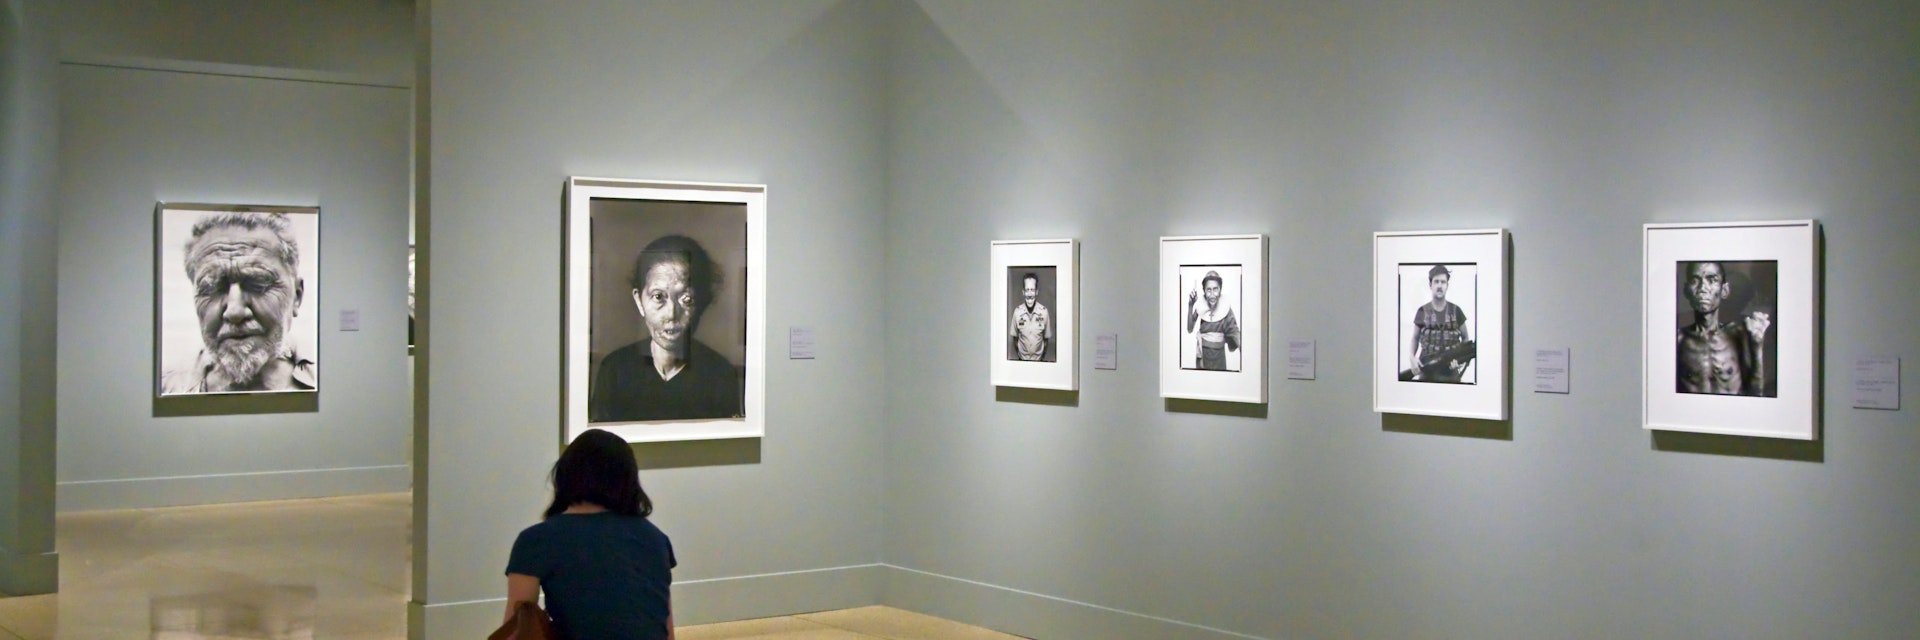 E3MYC0 RICHARD AVEDON photographs on display in the SAN DIEGO MUSEUM OF ART is located in BALBOA PARK - SAN DIEGO, CALIFORNIA
Museum of Photographic Arts
MoPA
